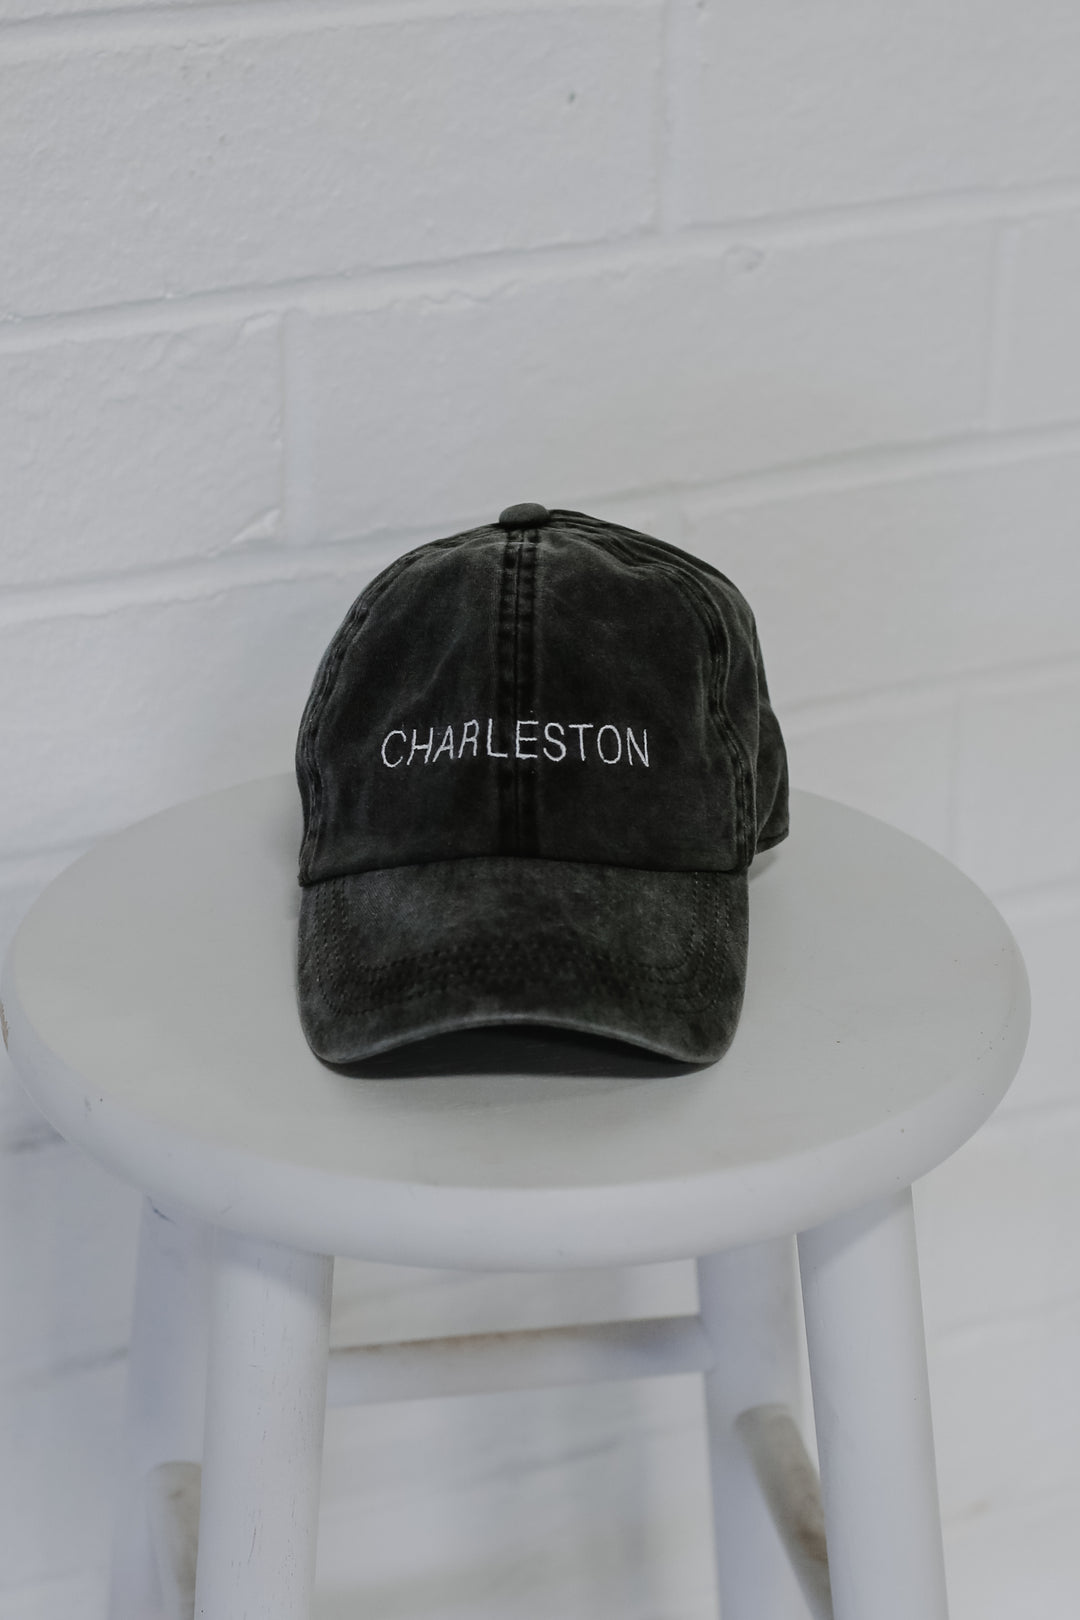 Charleston Embroidered Hat in black flat lay